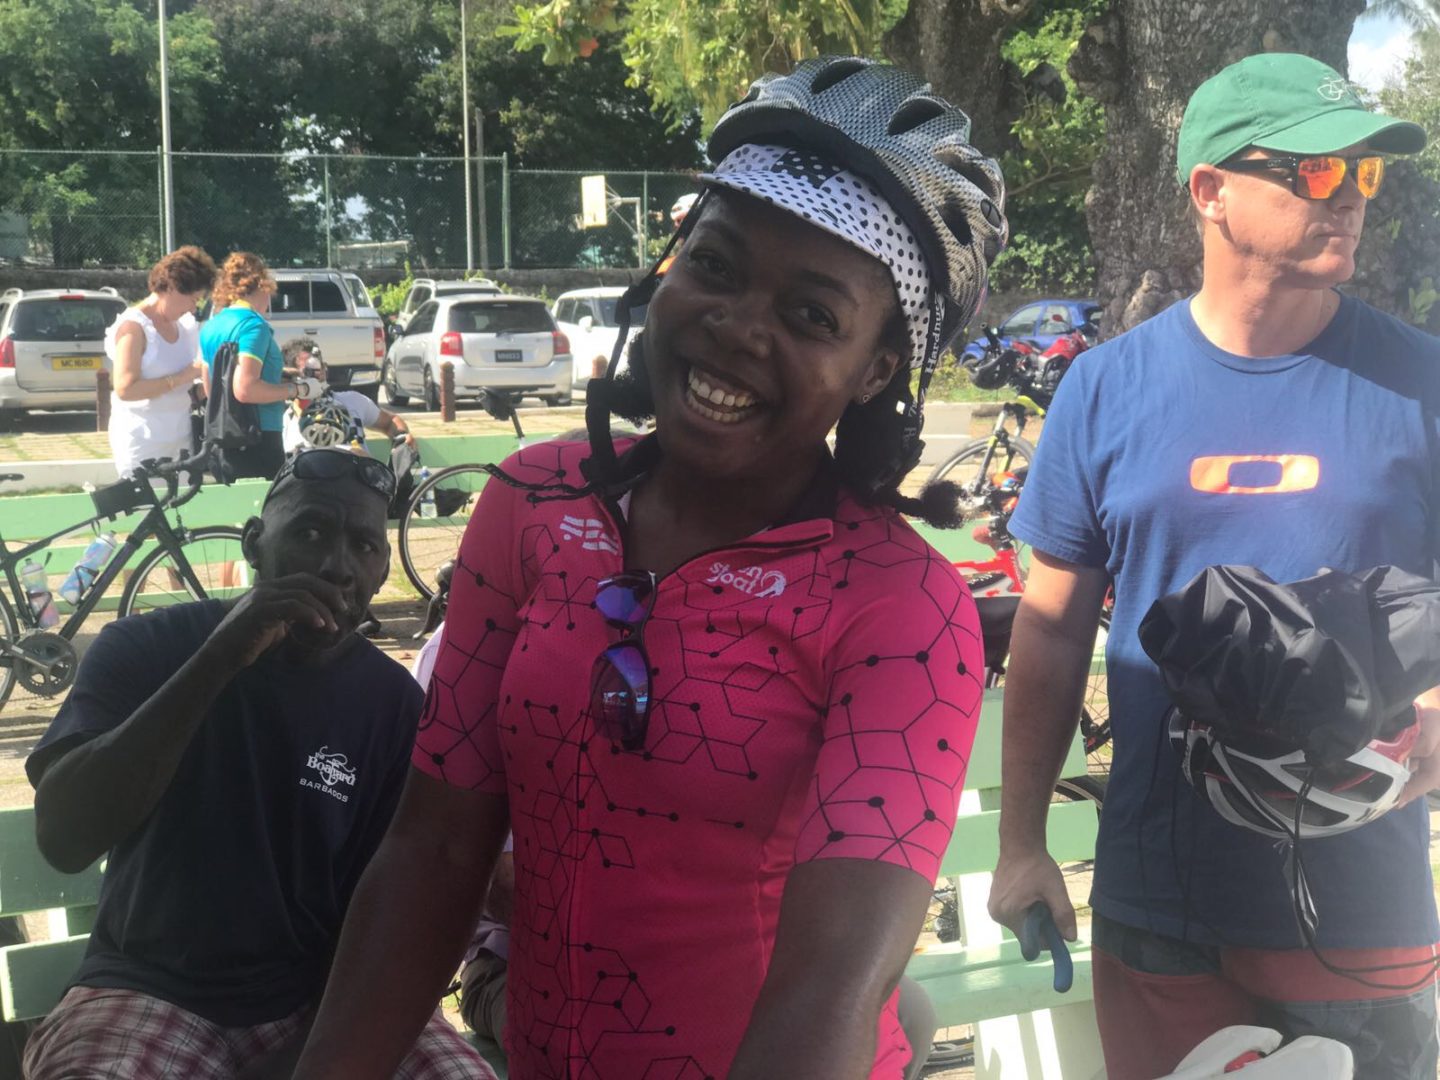 Elle at finish line of Barbados Cycling Festival 